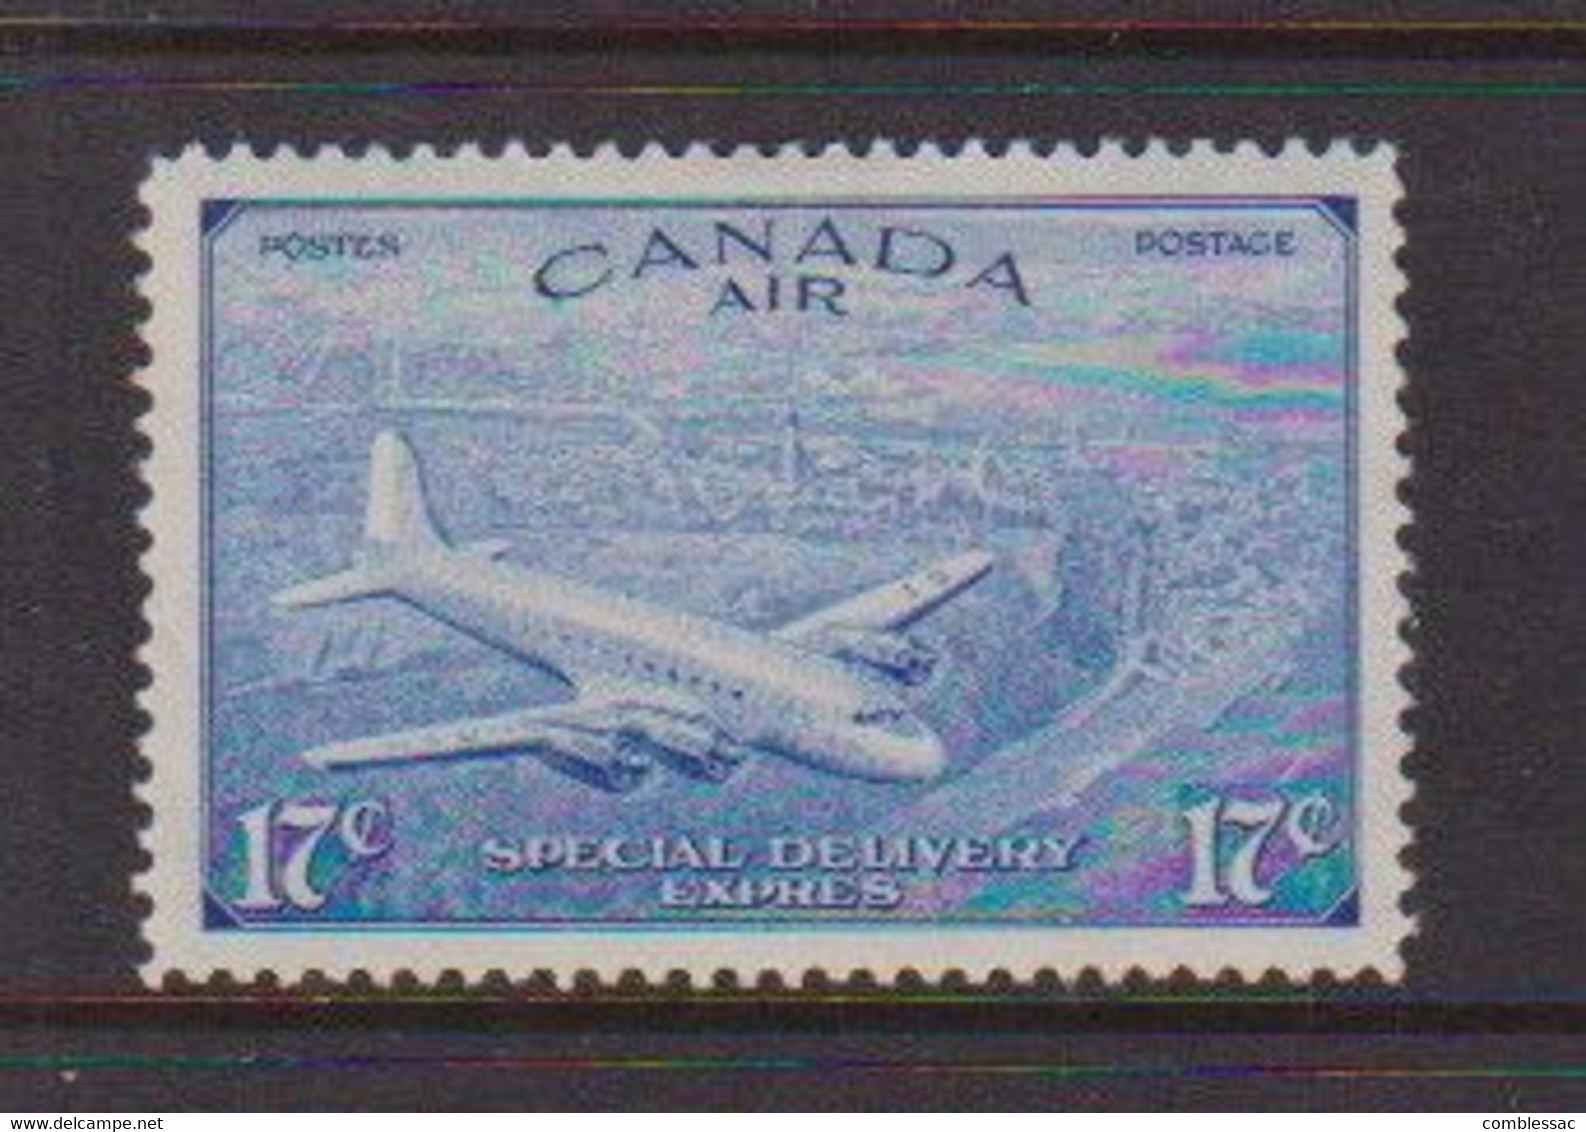 CANADA    Special  Delivery    Air  Stamp   17c  Blue    MH - Luchtpost: Expres